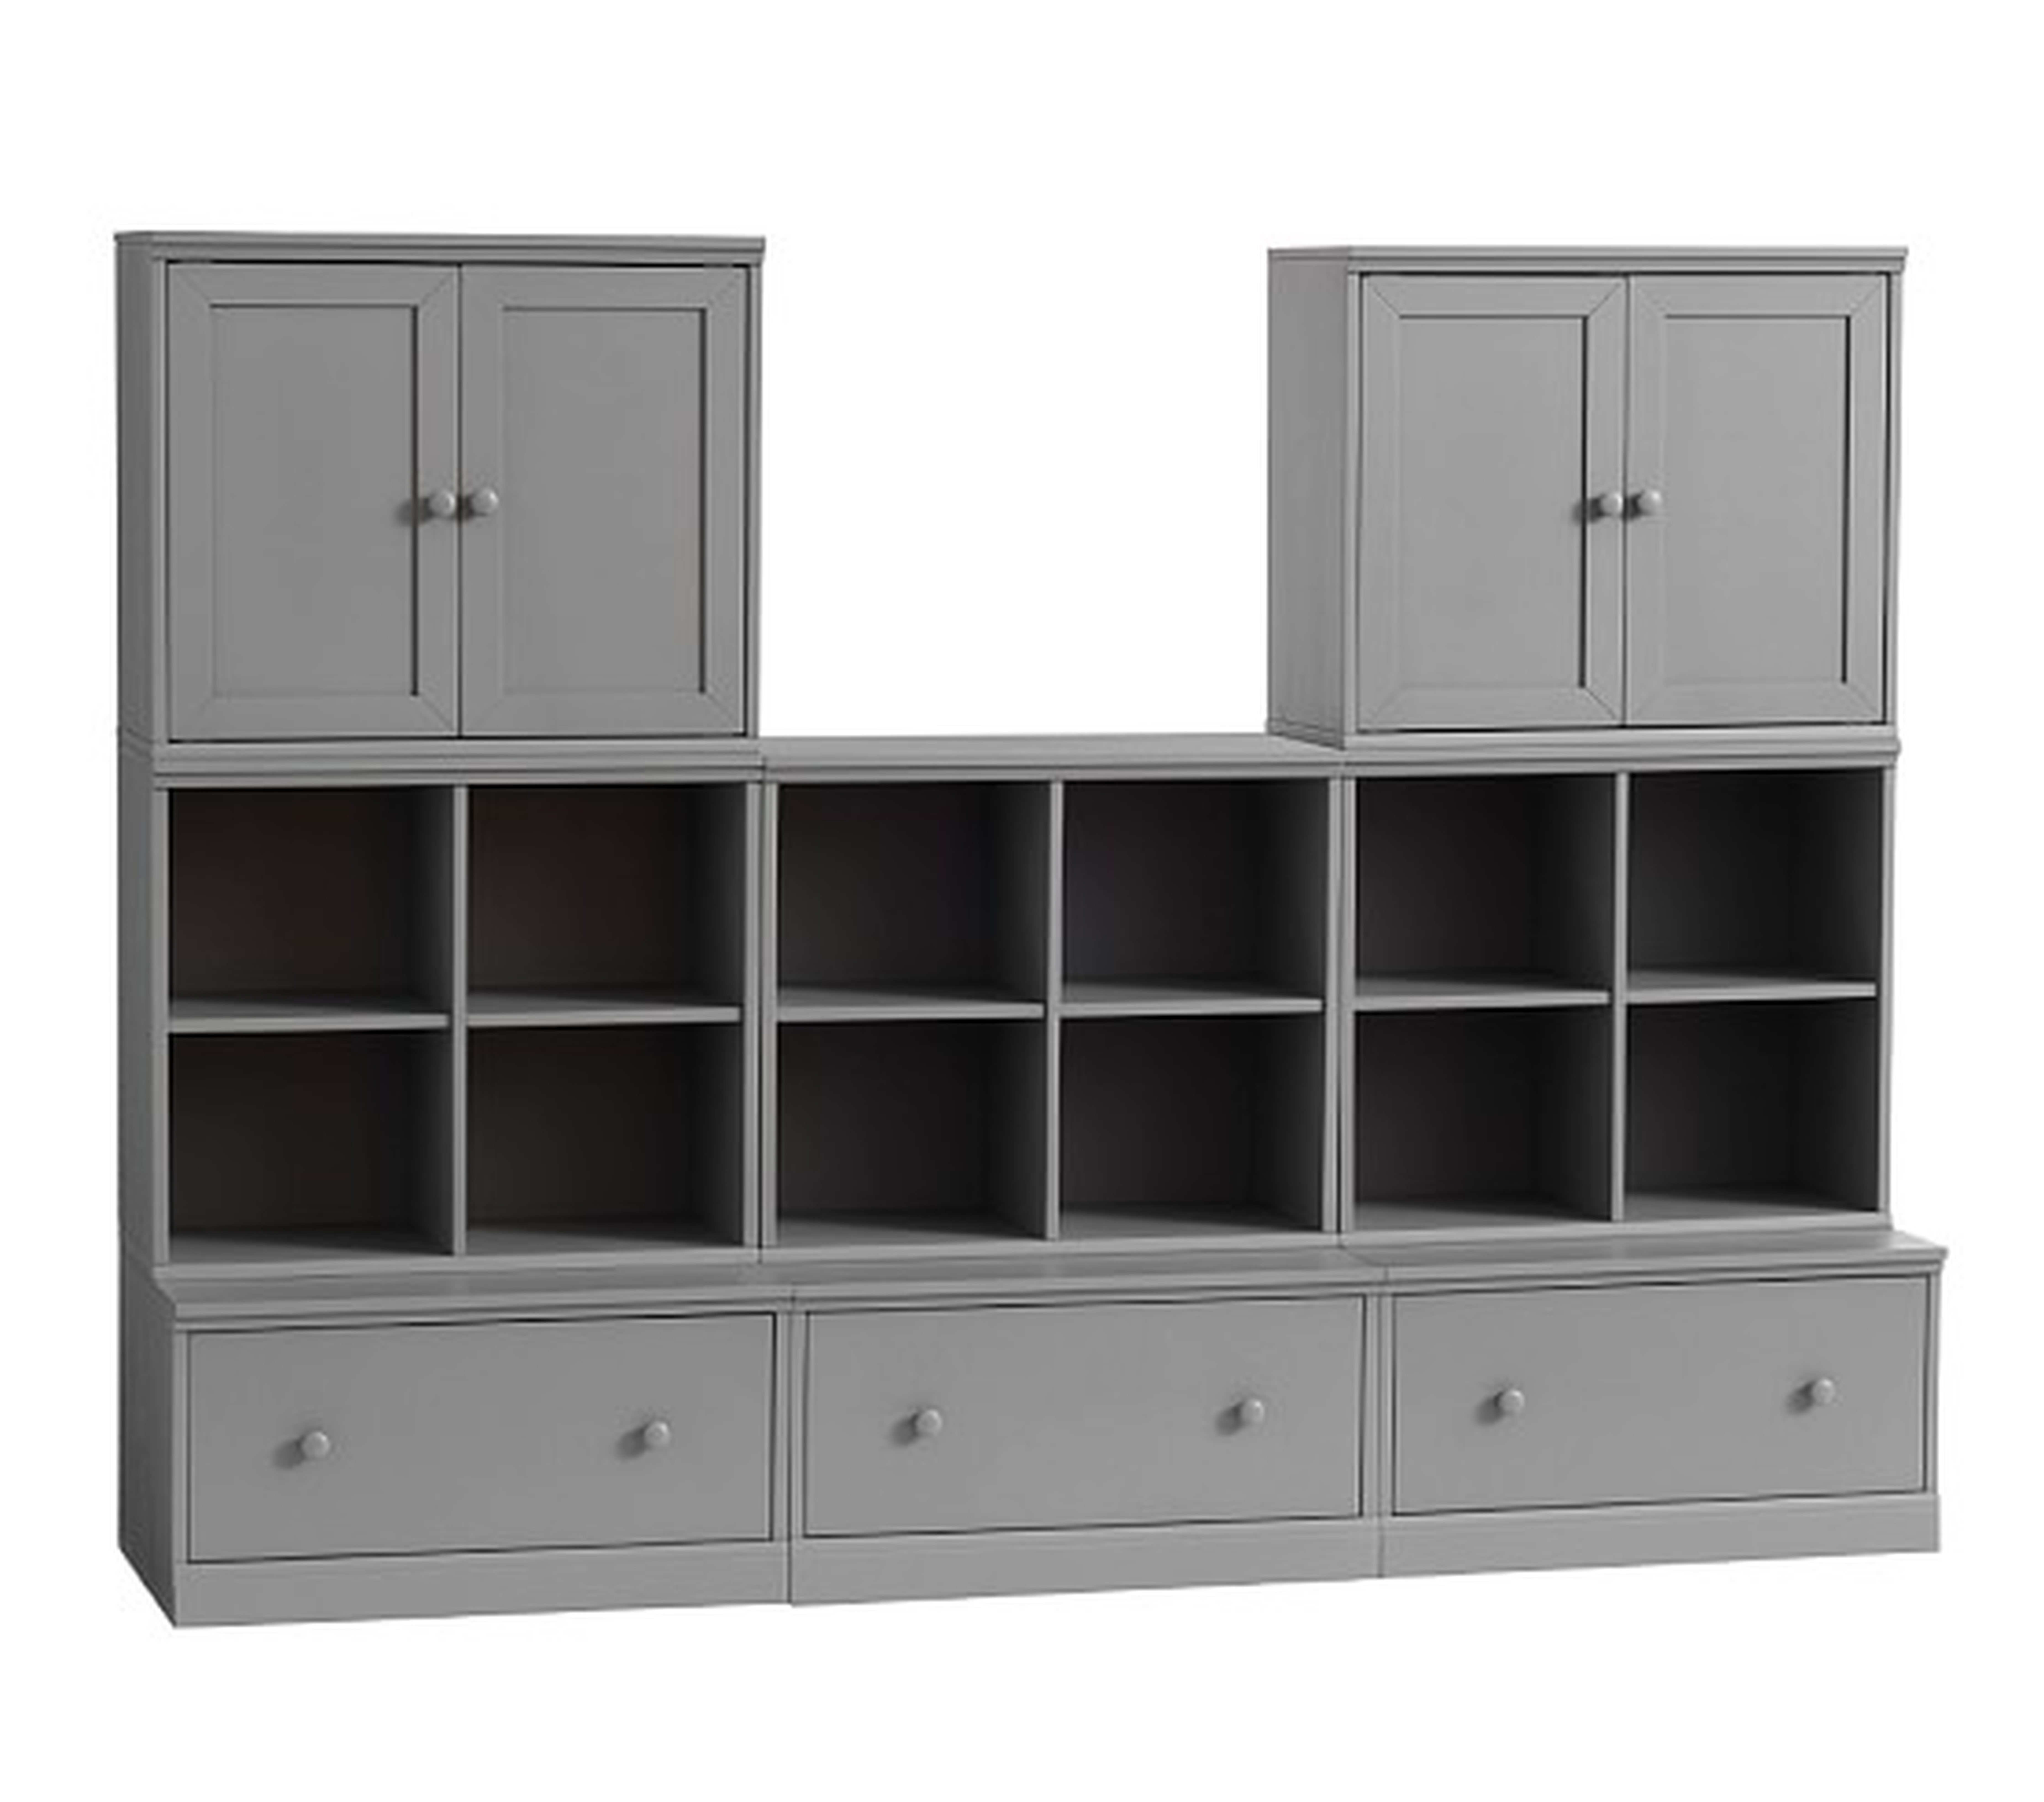 Cameron 3 Cubbies, 2 Cabinets, & 3 Drawer Bases, Charcoal, UPS - Pottery Barn Kids